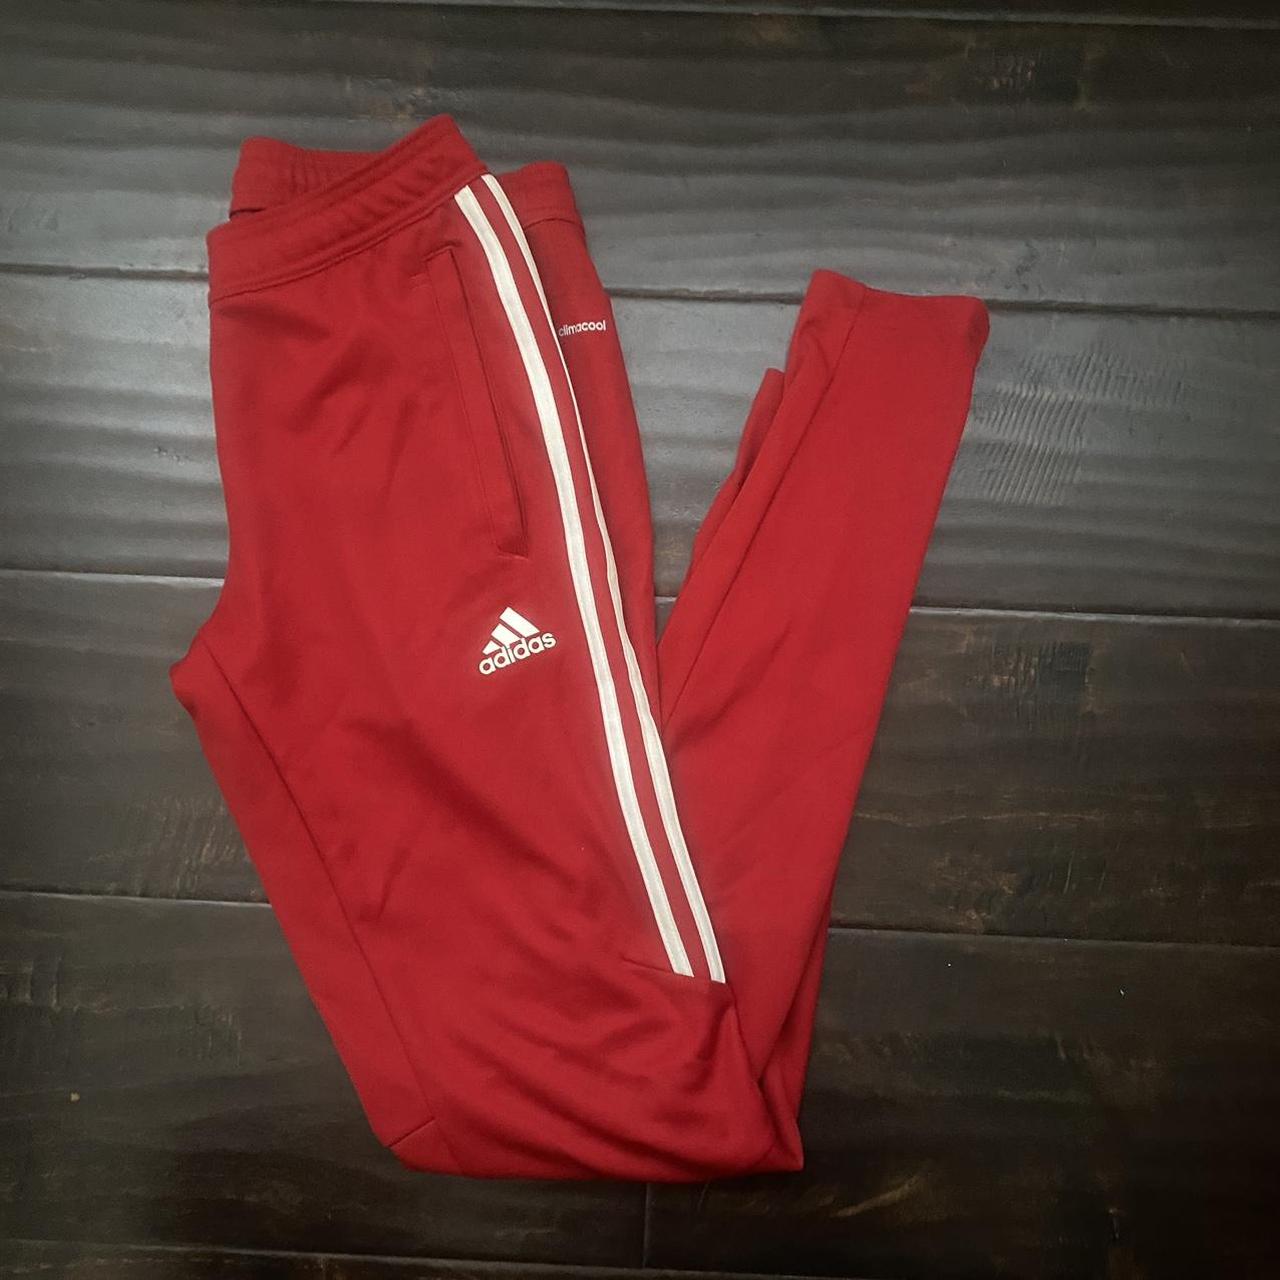 Buy now Adidas JS PERFORMANCE PANT W  H50963  Adidas Climacool Vent Pink